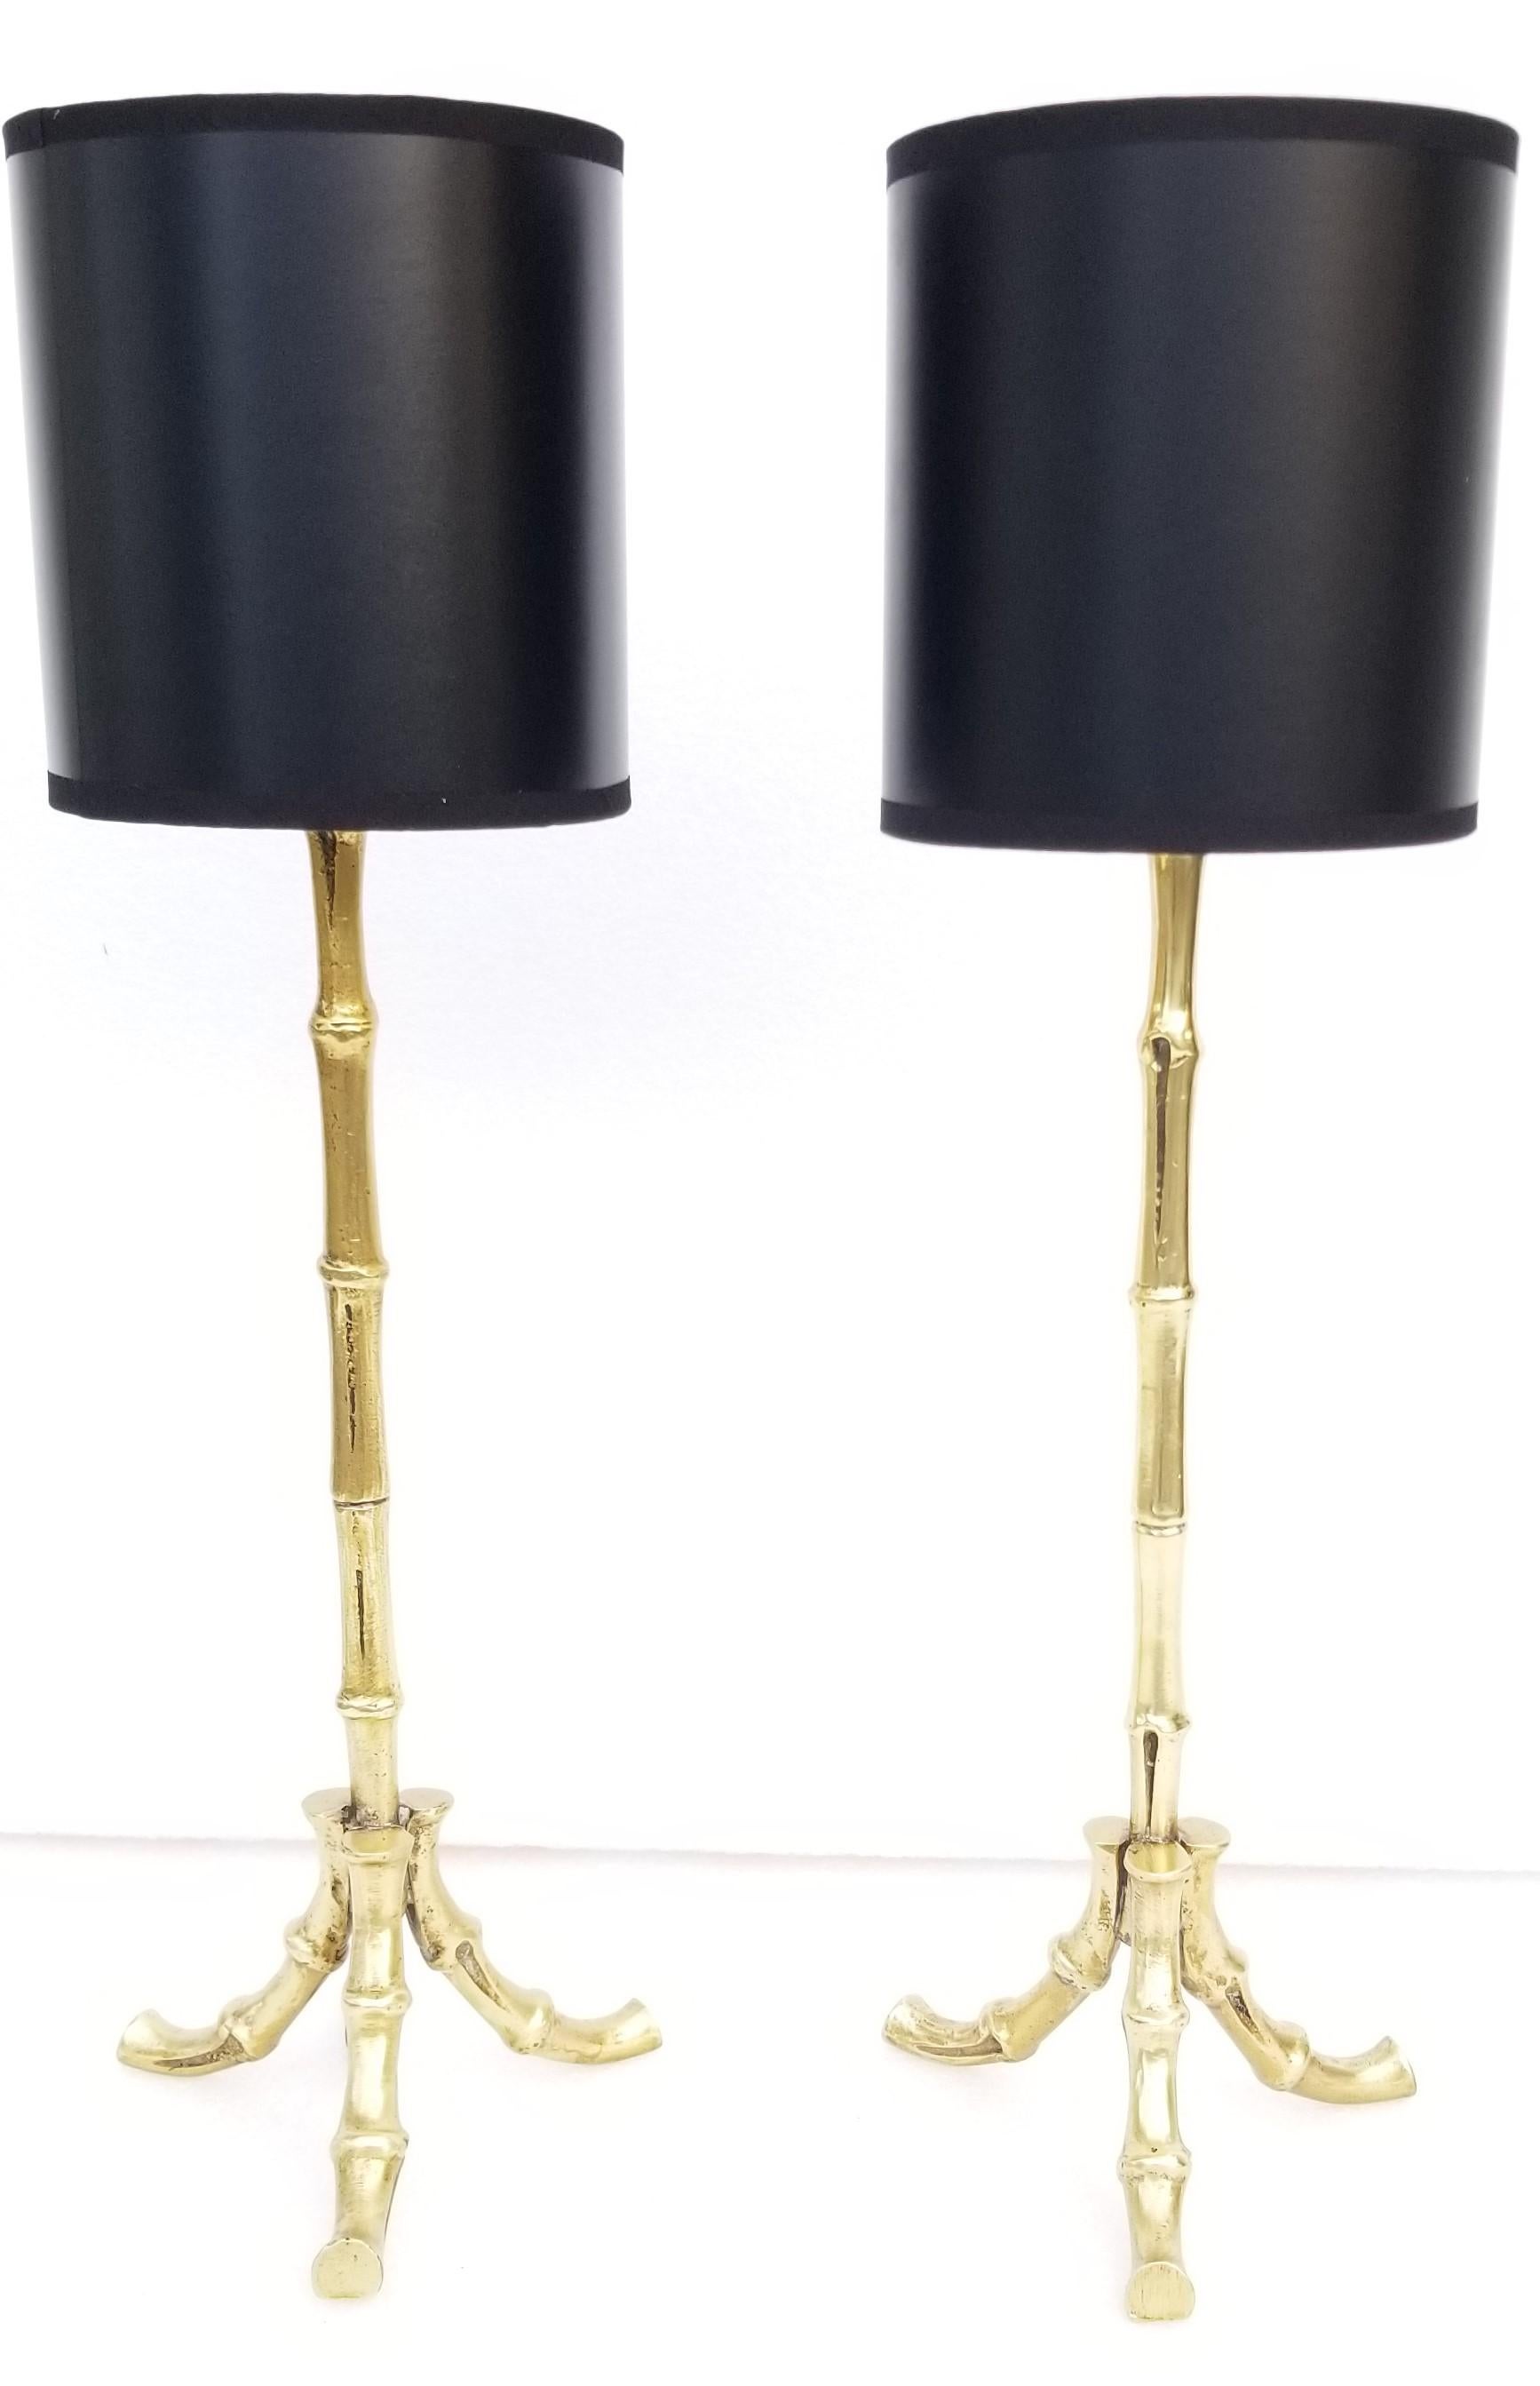 Pair of Maison Baguès table lamp, classical bamboo shape, solid bronze.
US rewired and in working condition
1 light, 60 watts E26 bulb.